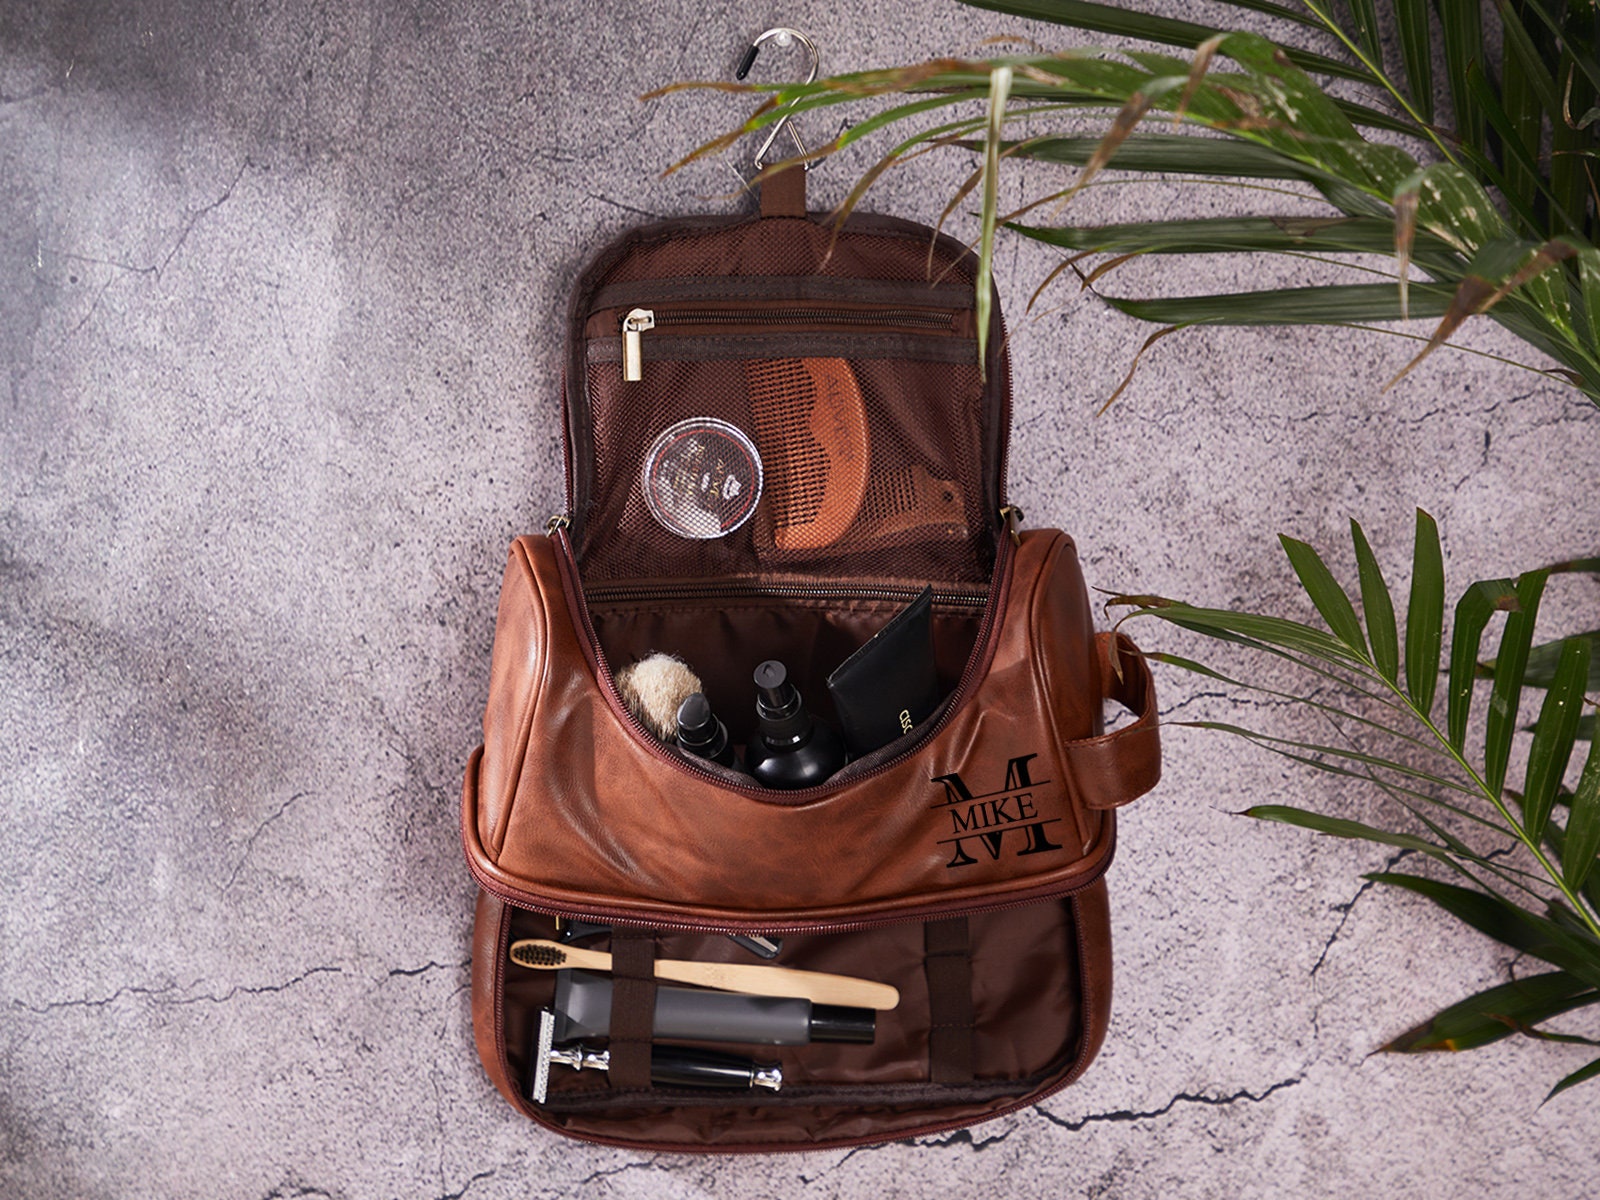 Mens Accessories With Dark Brown Leather Bags On Wooden Table Over